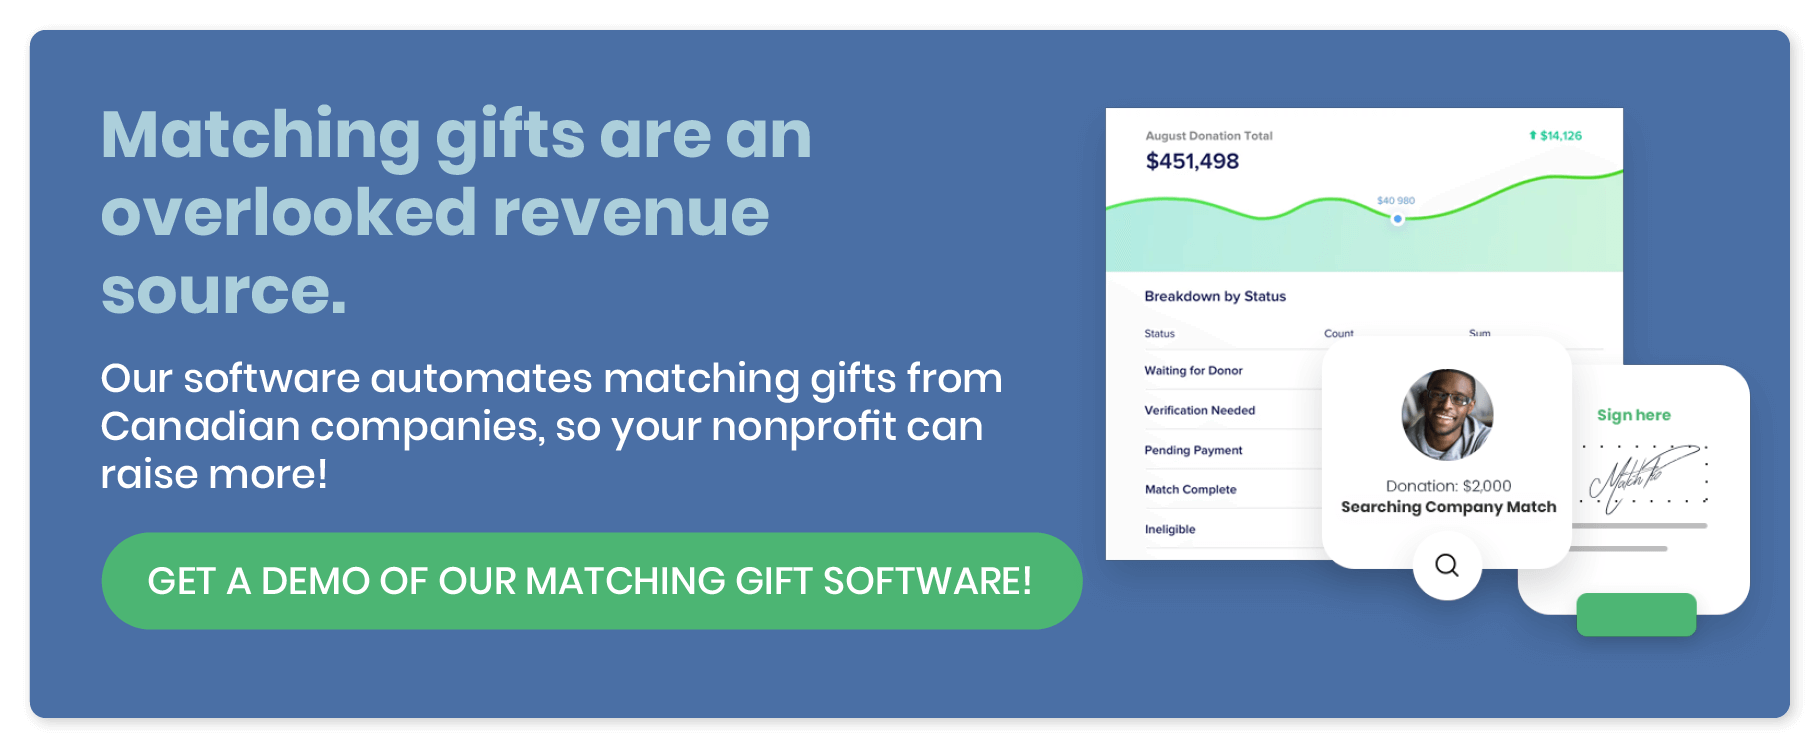 Click here to get a demo and see how our tools help secure matching gifts for Canadian nonprofits.